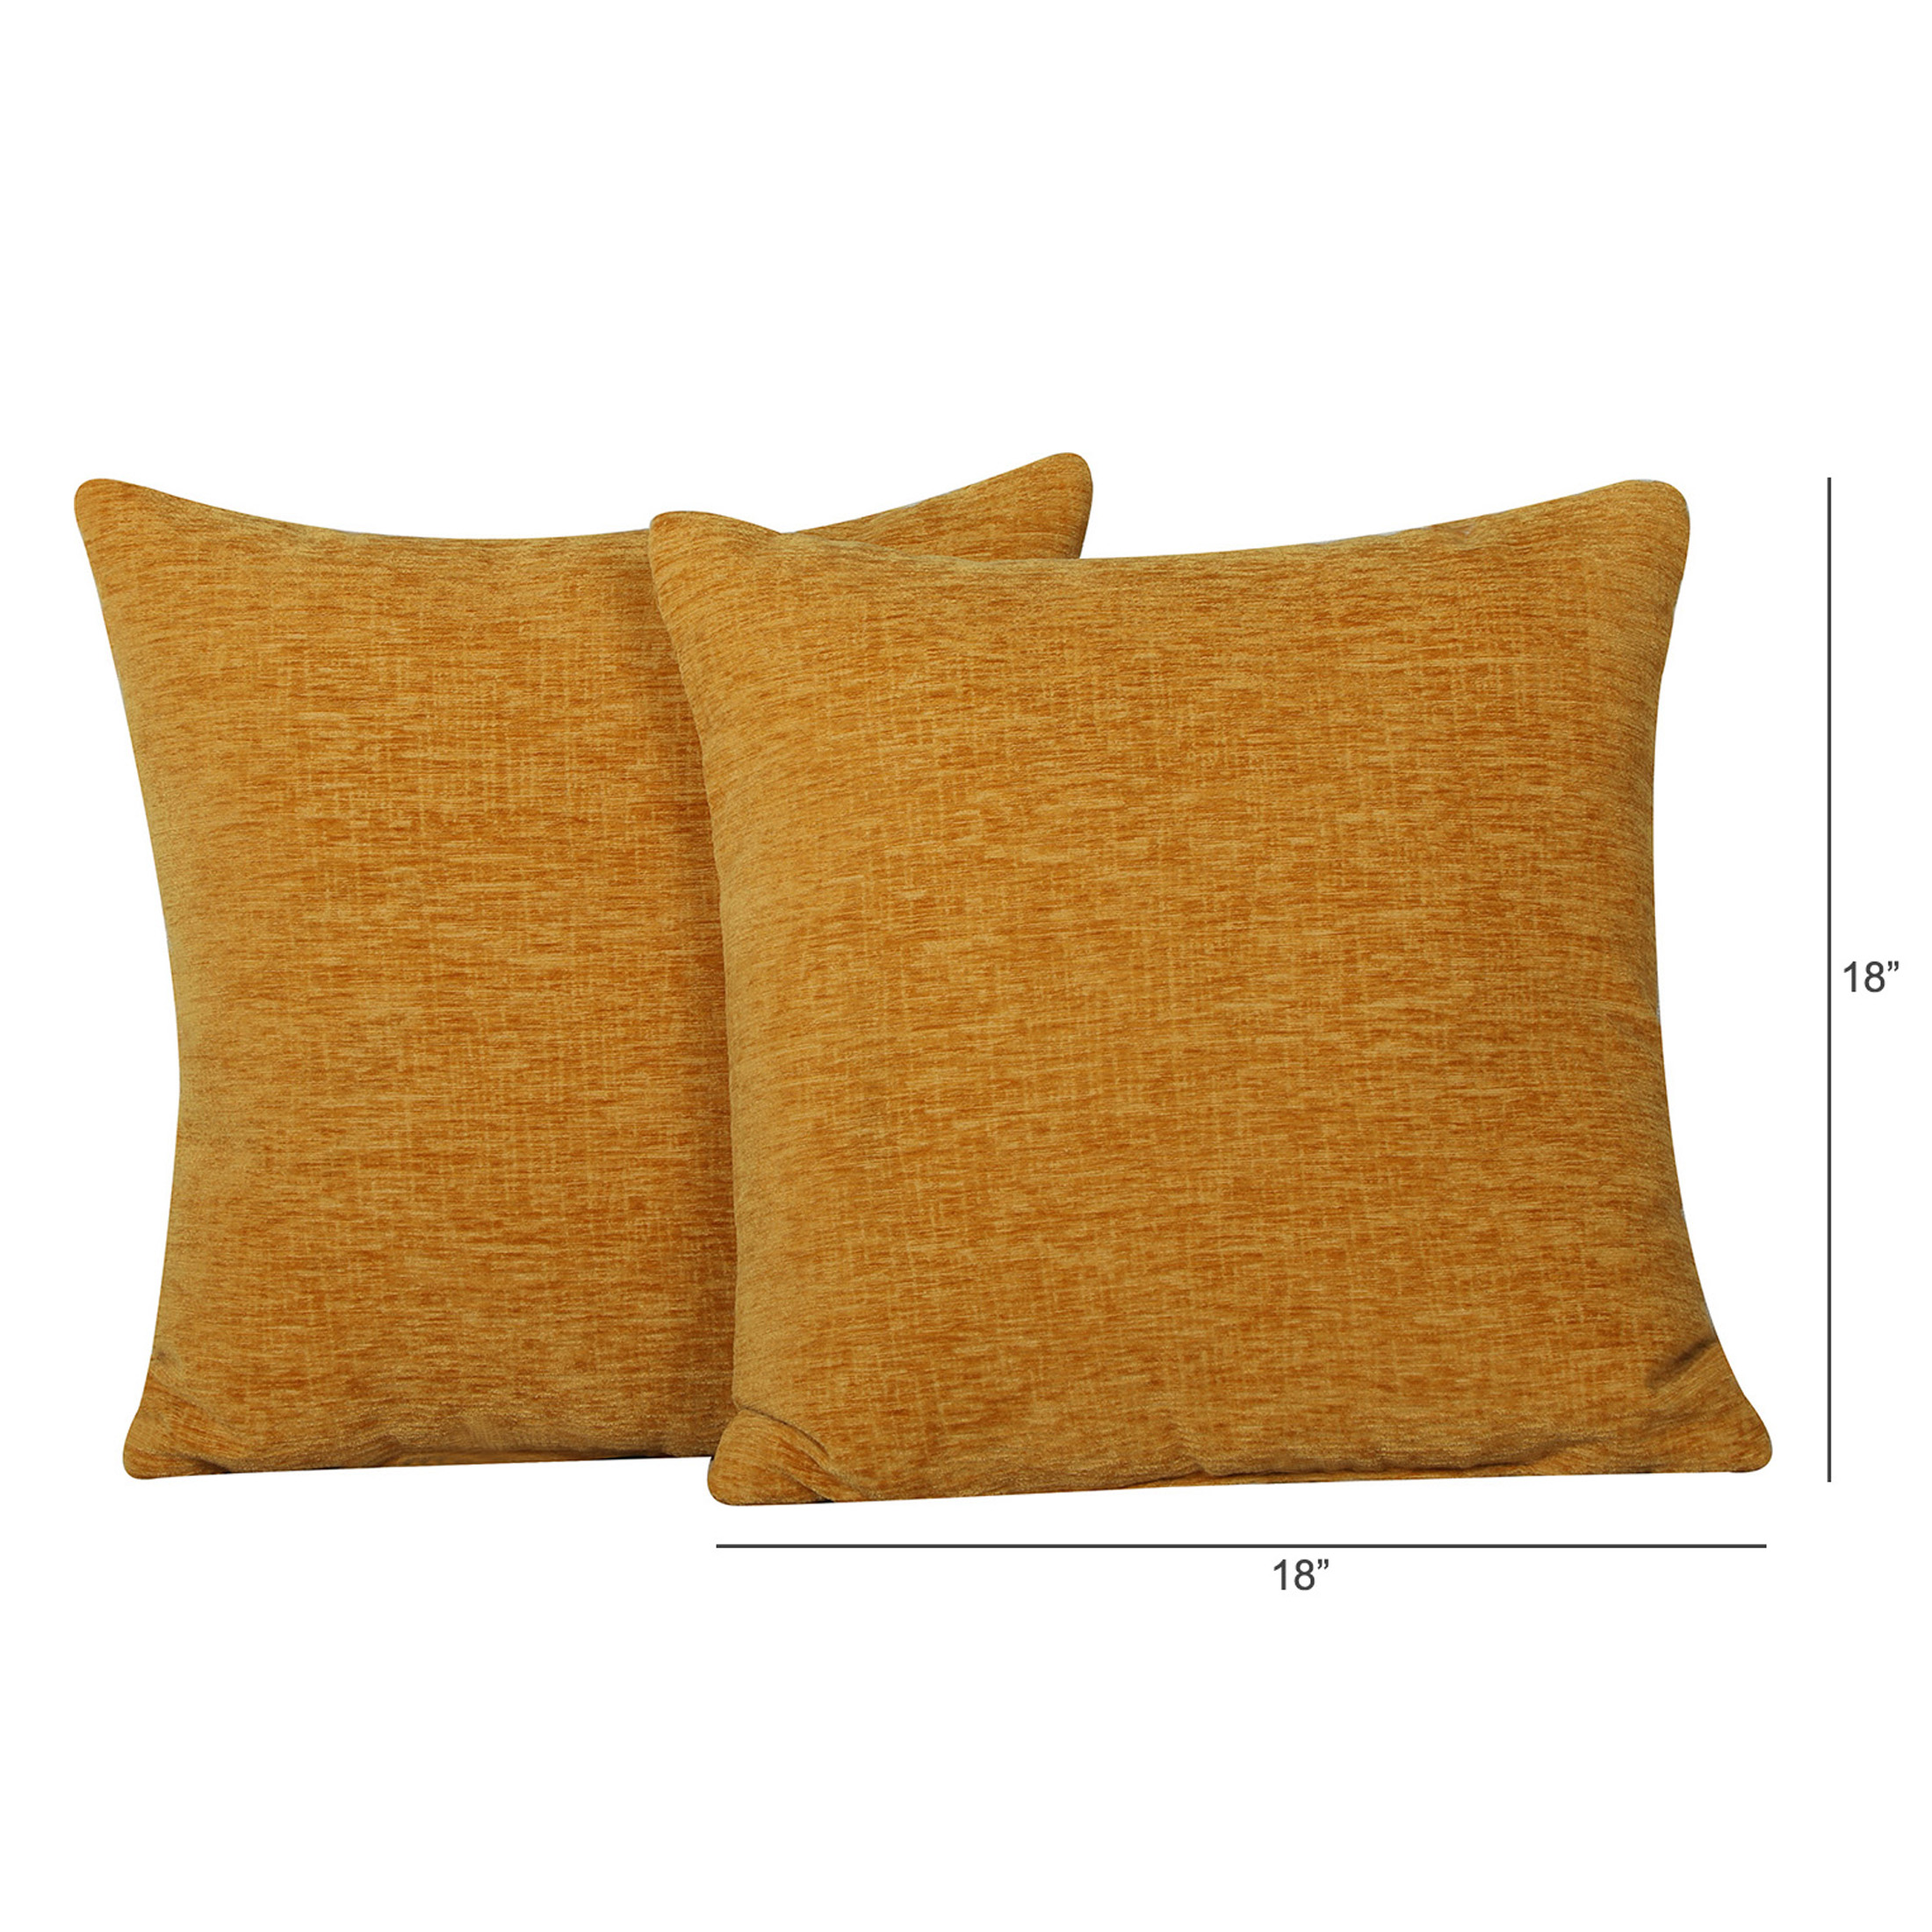 Mainstays Chenille Yellow Pillow 18''x18'', 2 Pack - image 3 of 5